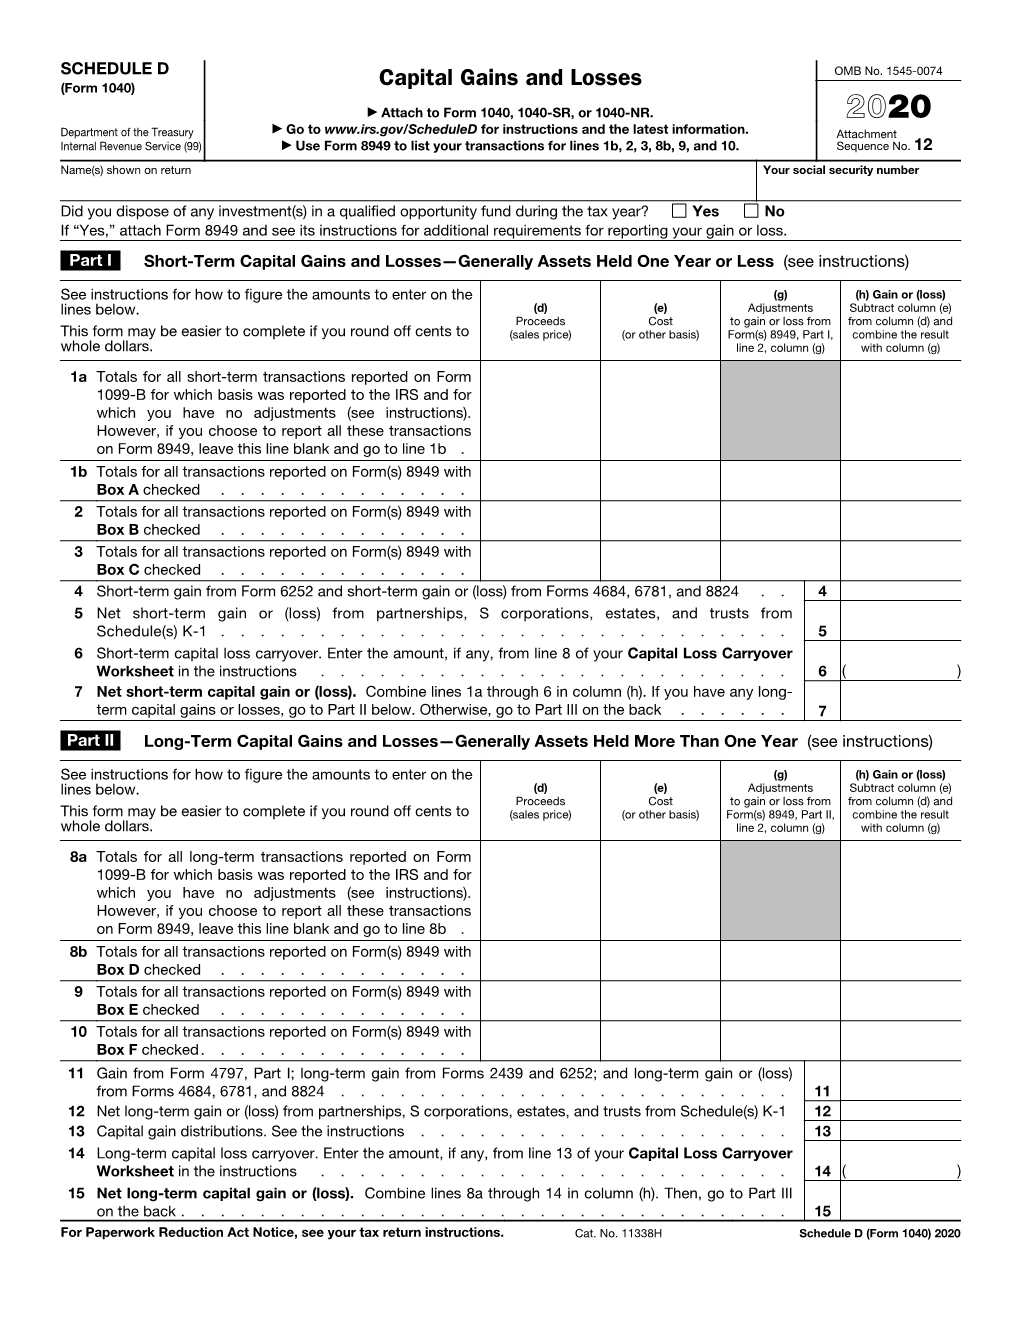 Form 1040) Capital Gains and Losses ▶ Attach to Form 1040, 1040-SR, Or 1040-NR